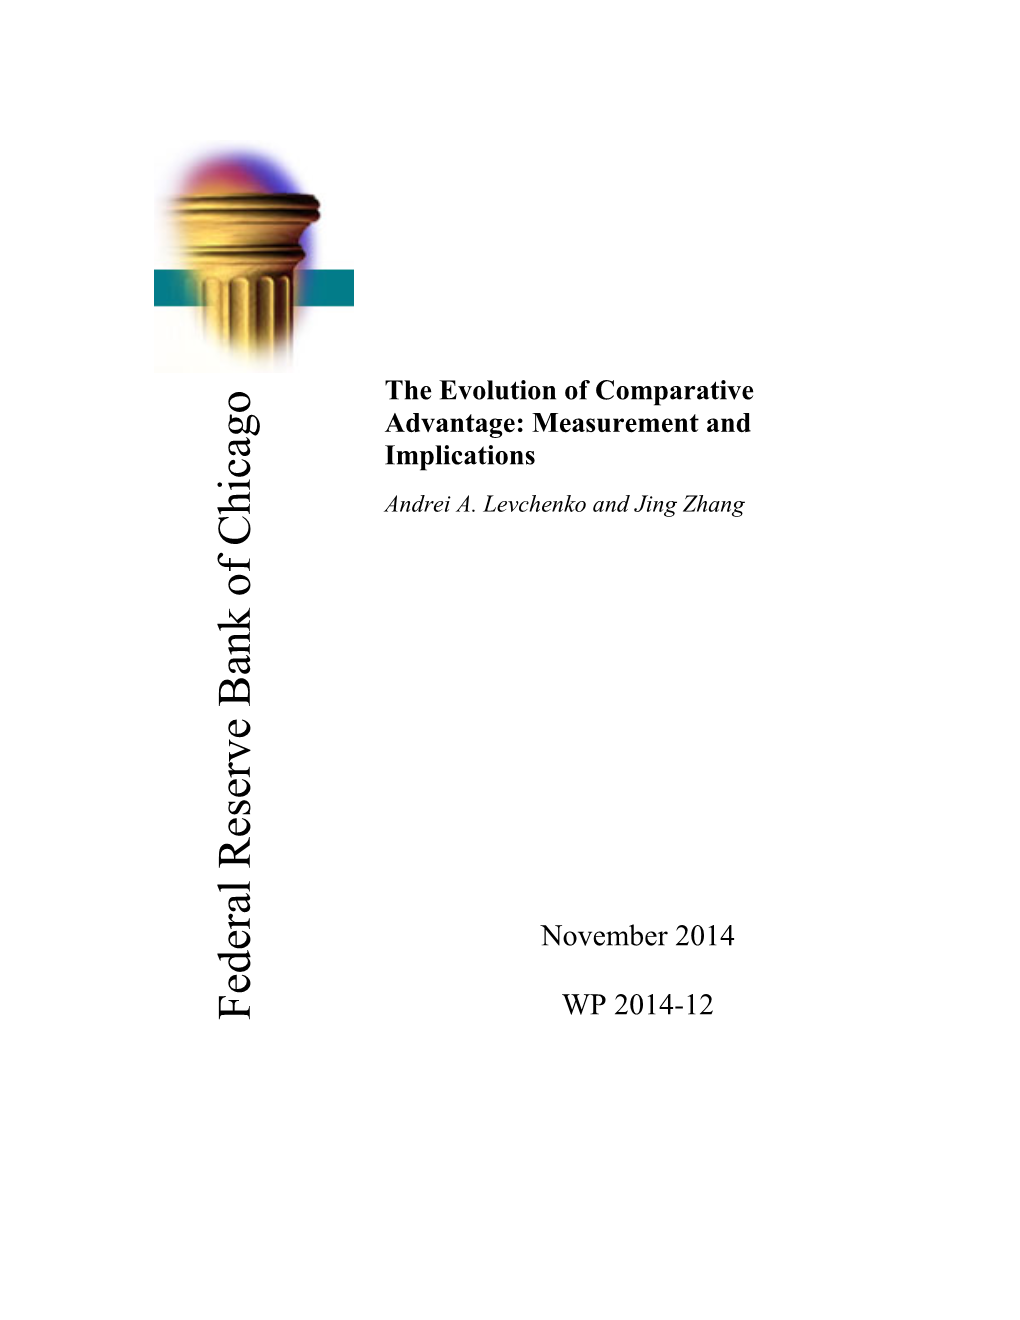 The Evolution of Comparative Advantage: Measurement and Implications